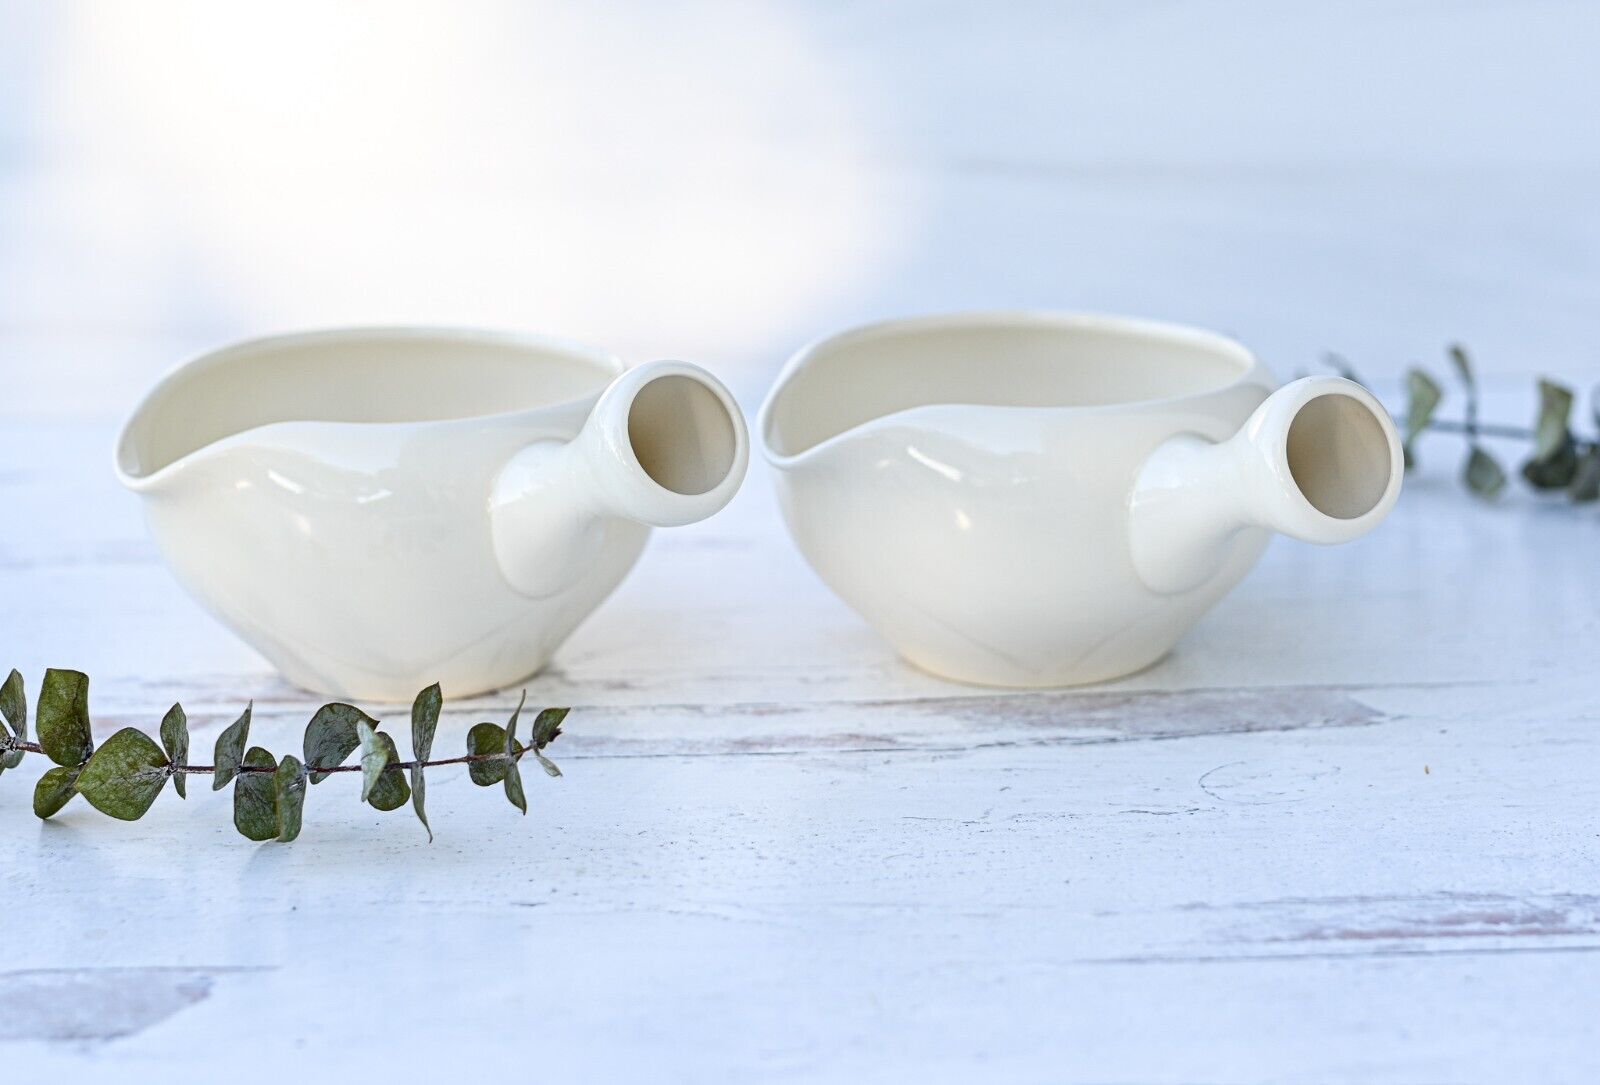 Handmade Ceramic White Matcha Cup with Spout and Handle